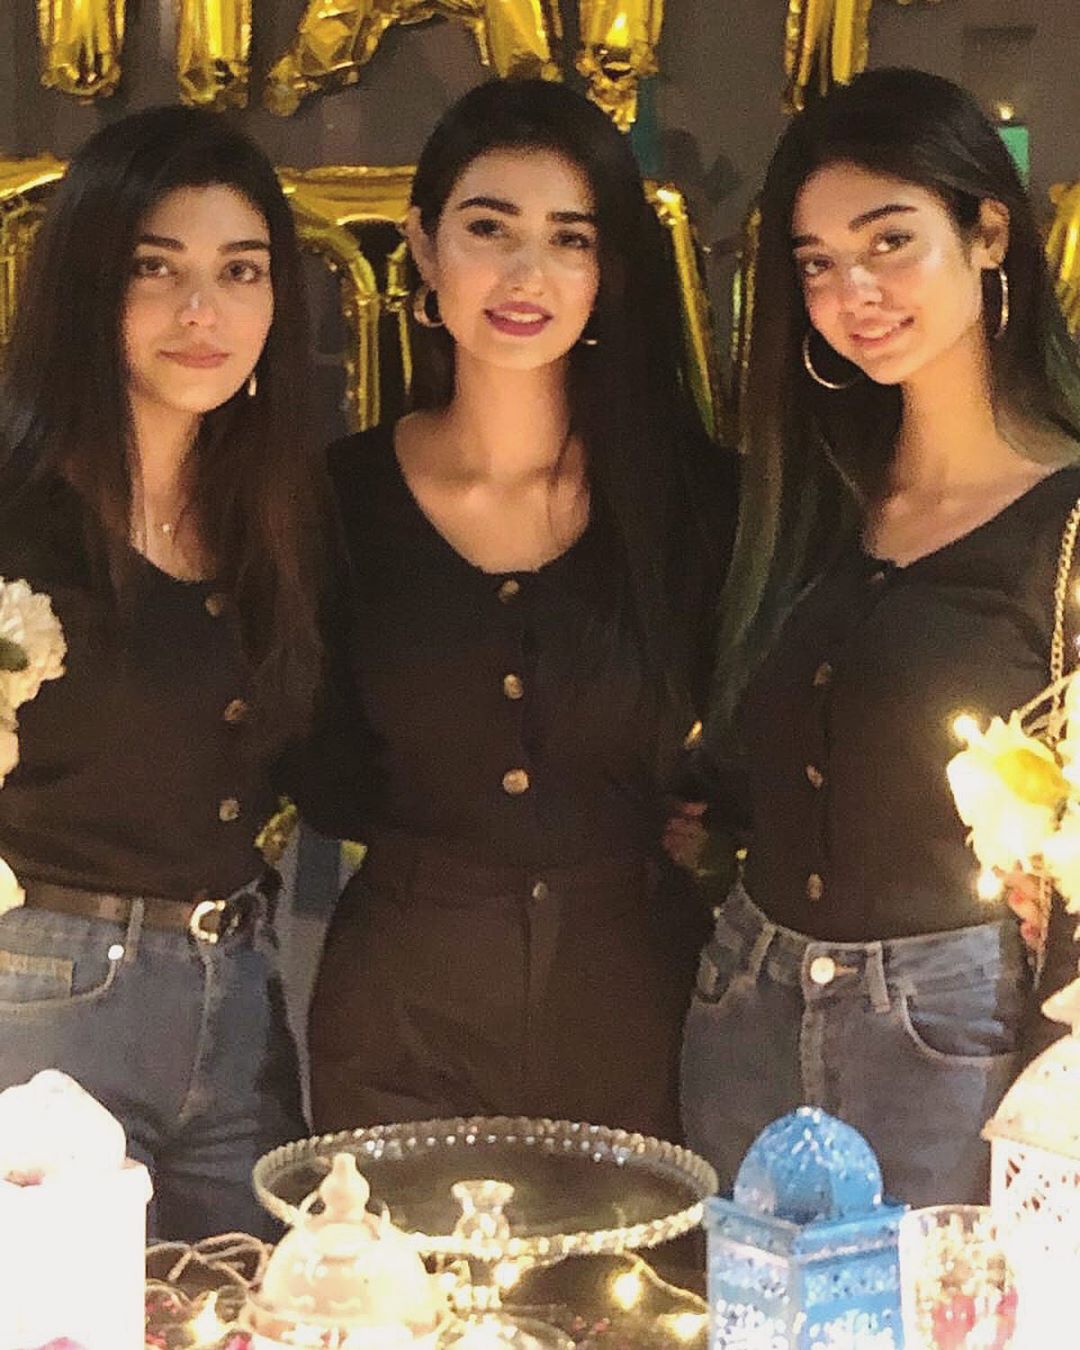 Did You Know Sarah Khan And Noor Khan Have Another Sister